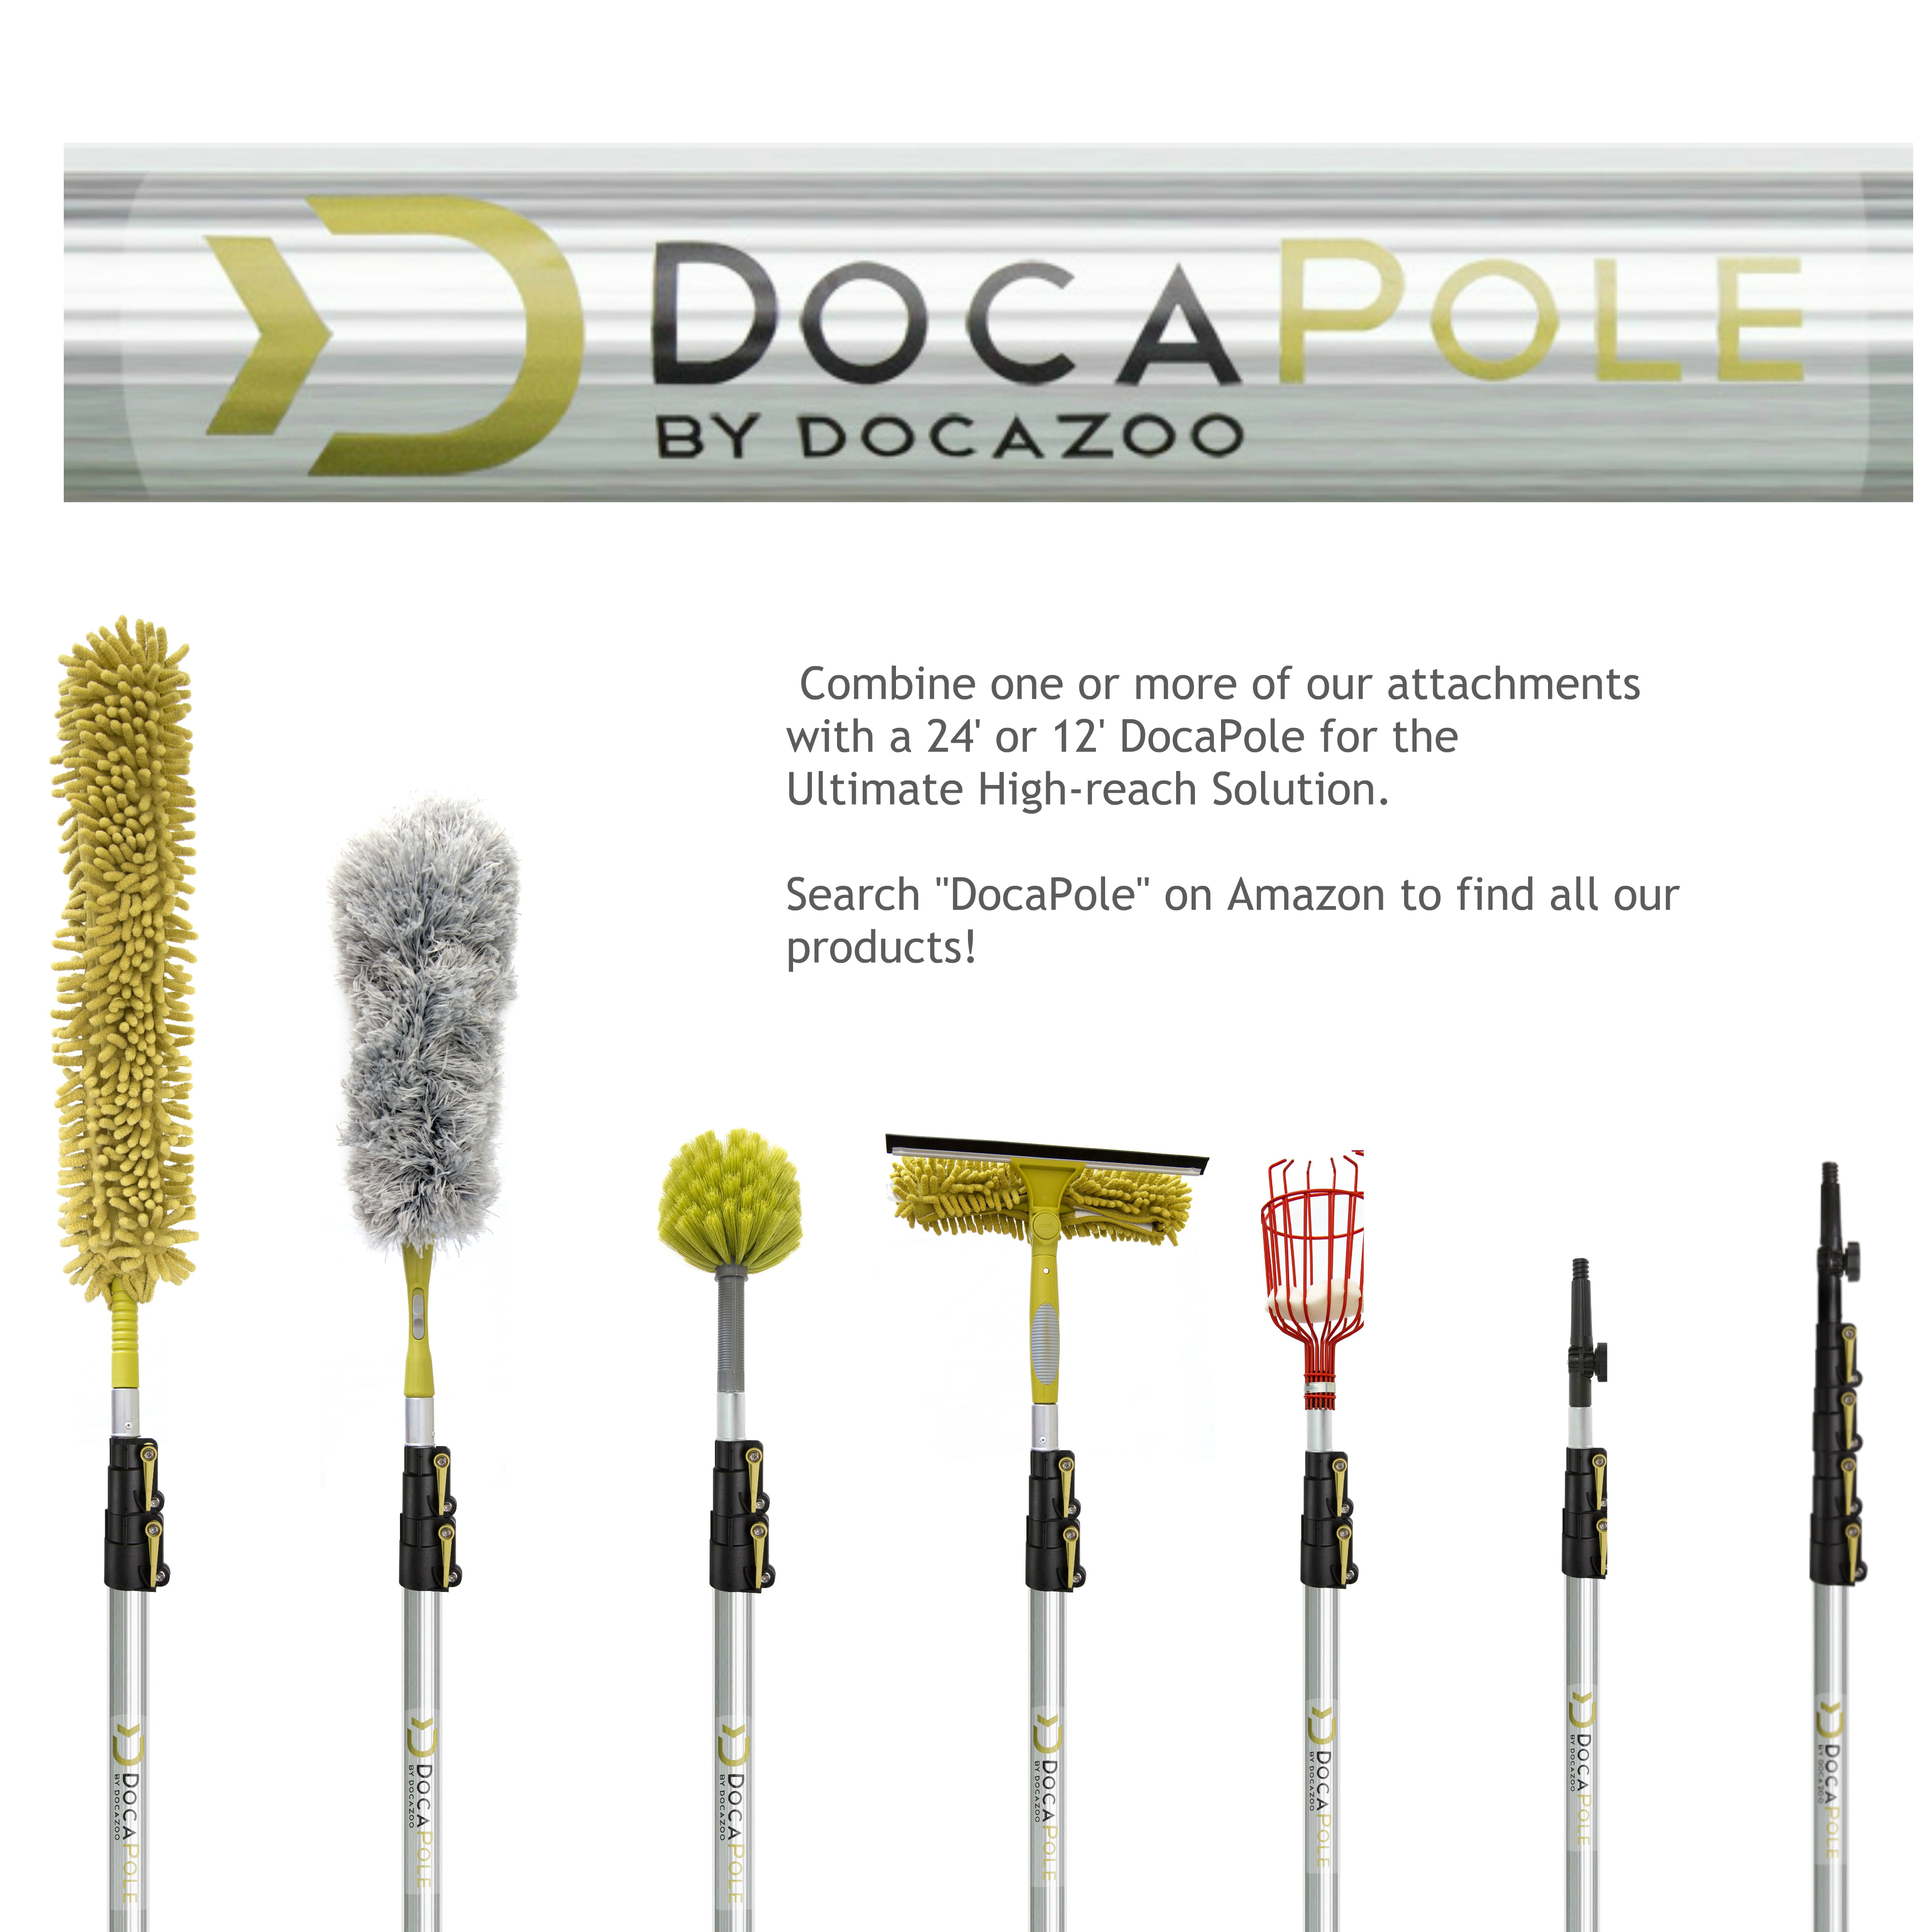 Docazoo DocaPole Soft Bristle Car Wash and Scrub Brush Extension Pole Attachment (10) for Deck, Truck, Boat, RV, House Siding, SA